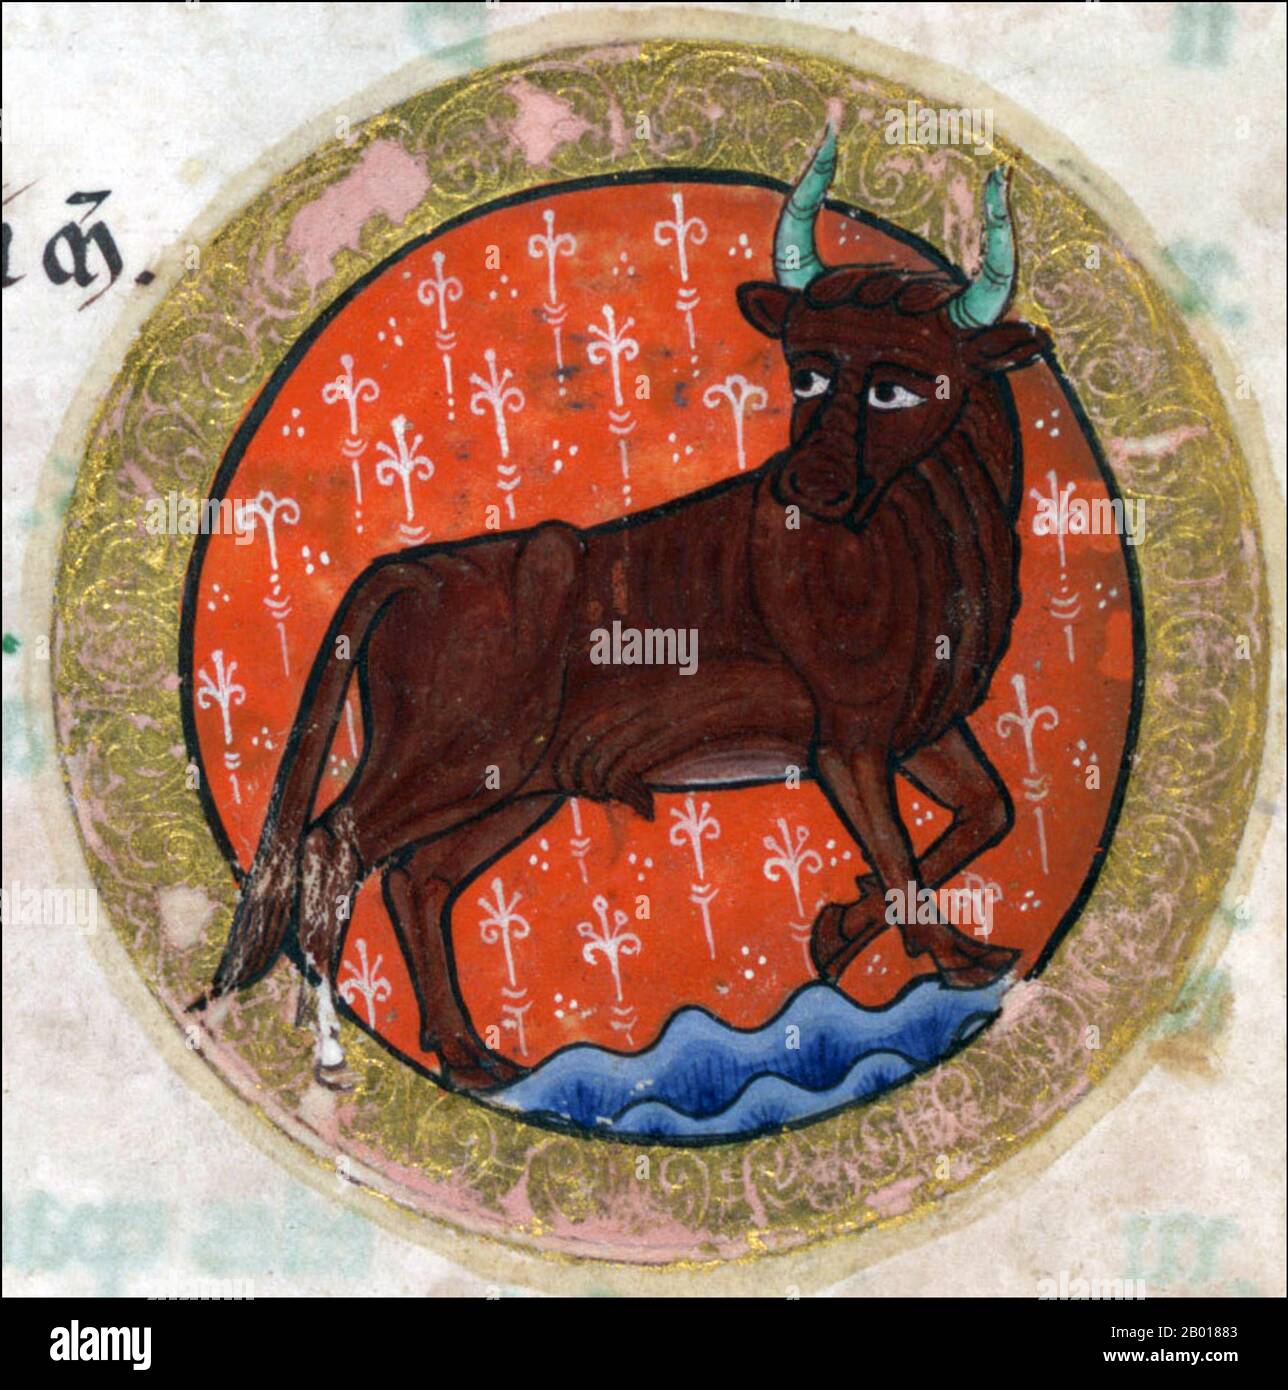 England: Zodiacal symbol for Taurus as represented in the Hunterian Psalter, c. 1170.  The Hunterian Psalter (or York Psalter) is an illuminated manuscript of the 12th century. It was produced in England some time around 1170, and is considered a striking example of Romanesque book art. The work is part of the collection of the Glasgow University Library, which acquired the book in 1807. It derives its colloquial name, the 'Hunterian Psalter', from having been part of the collection of 18th century Scottish anatomist and book collector William Hunter. Stock Photo